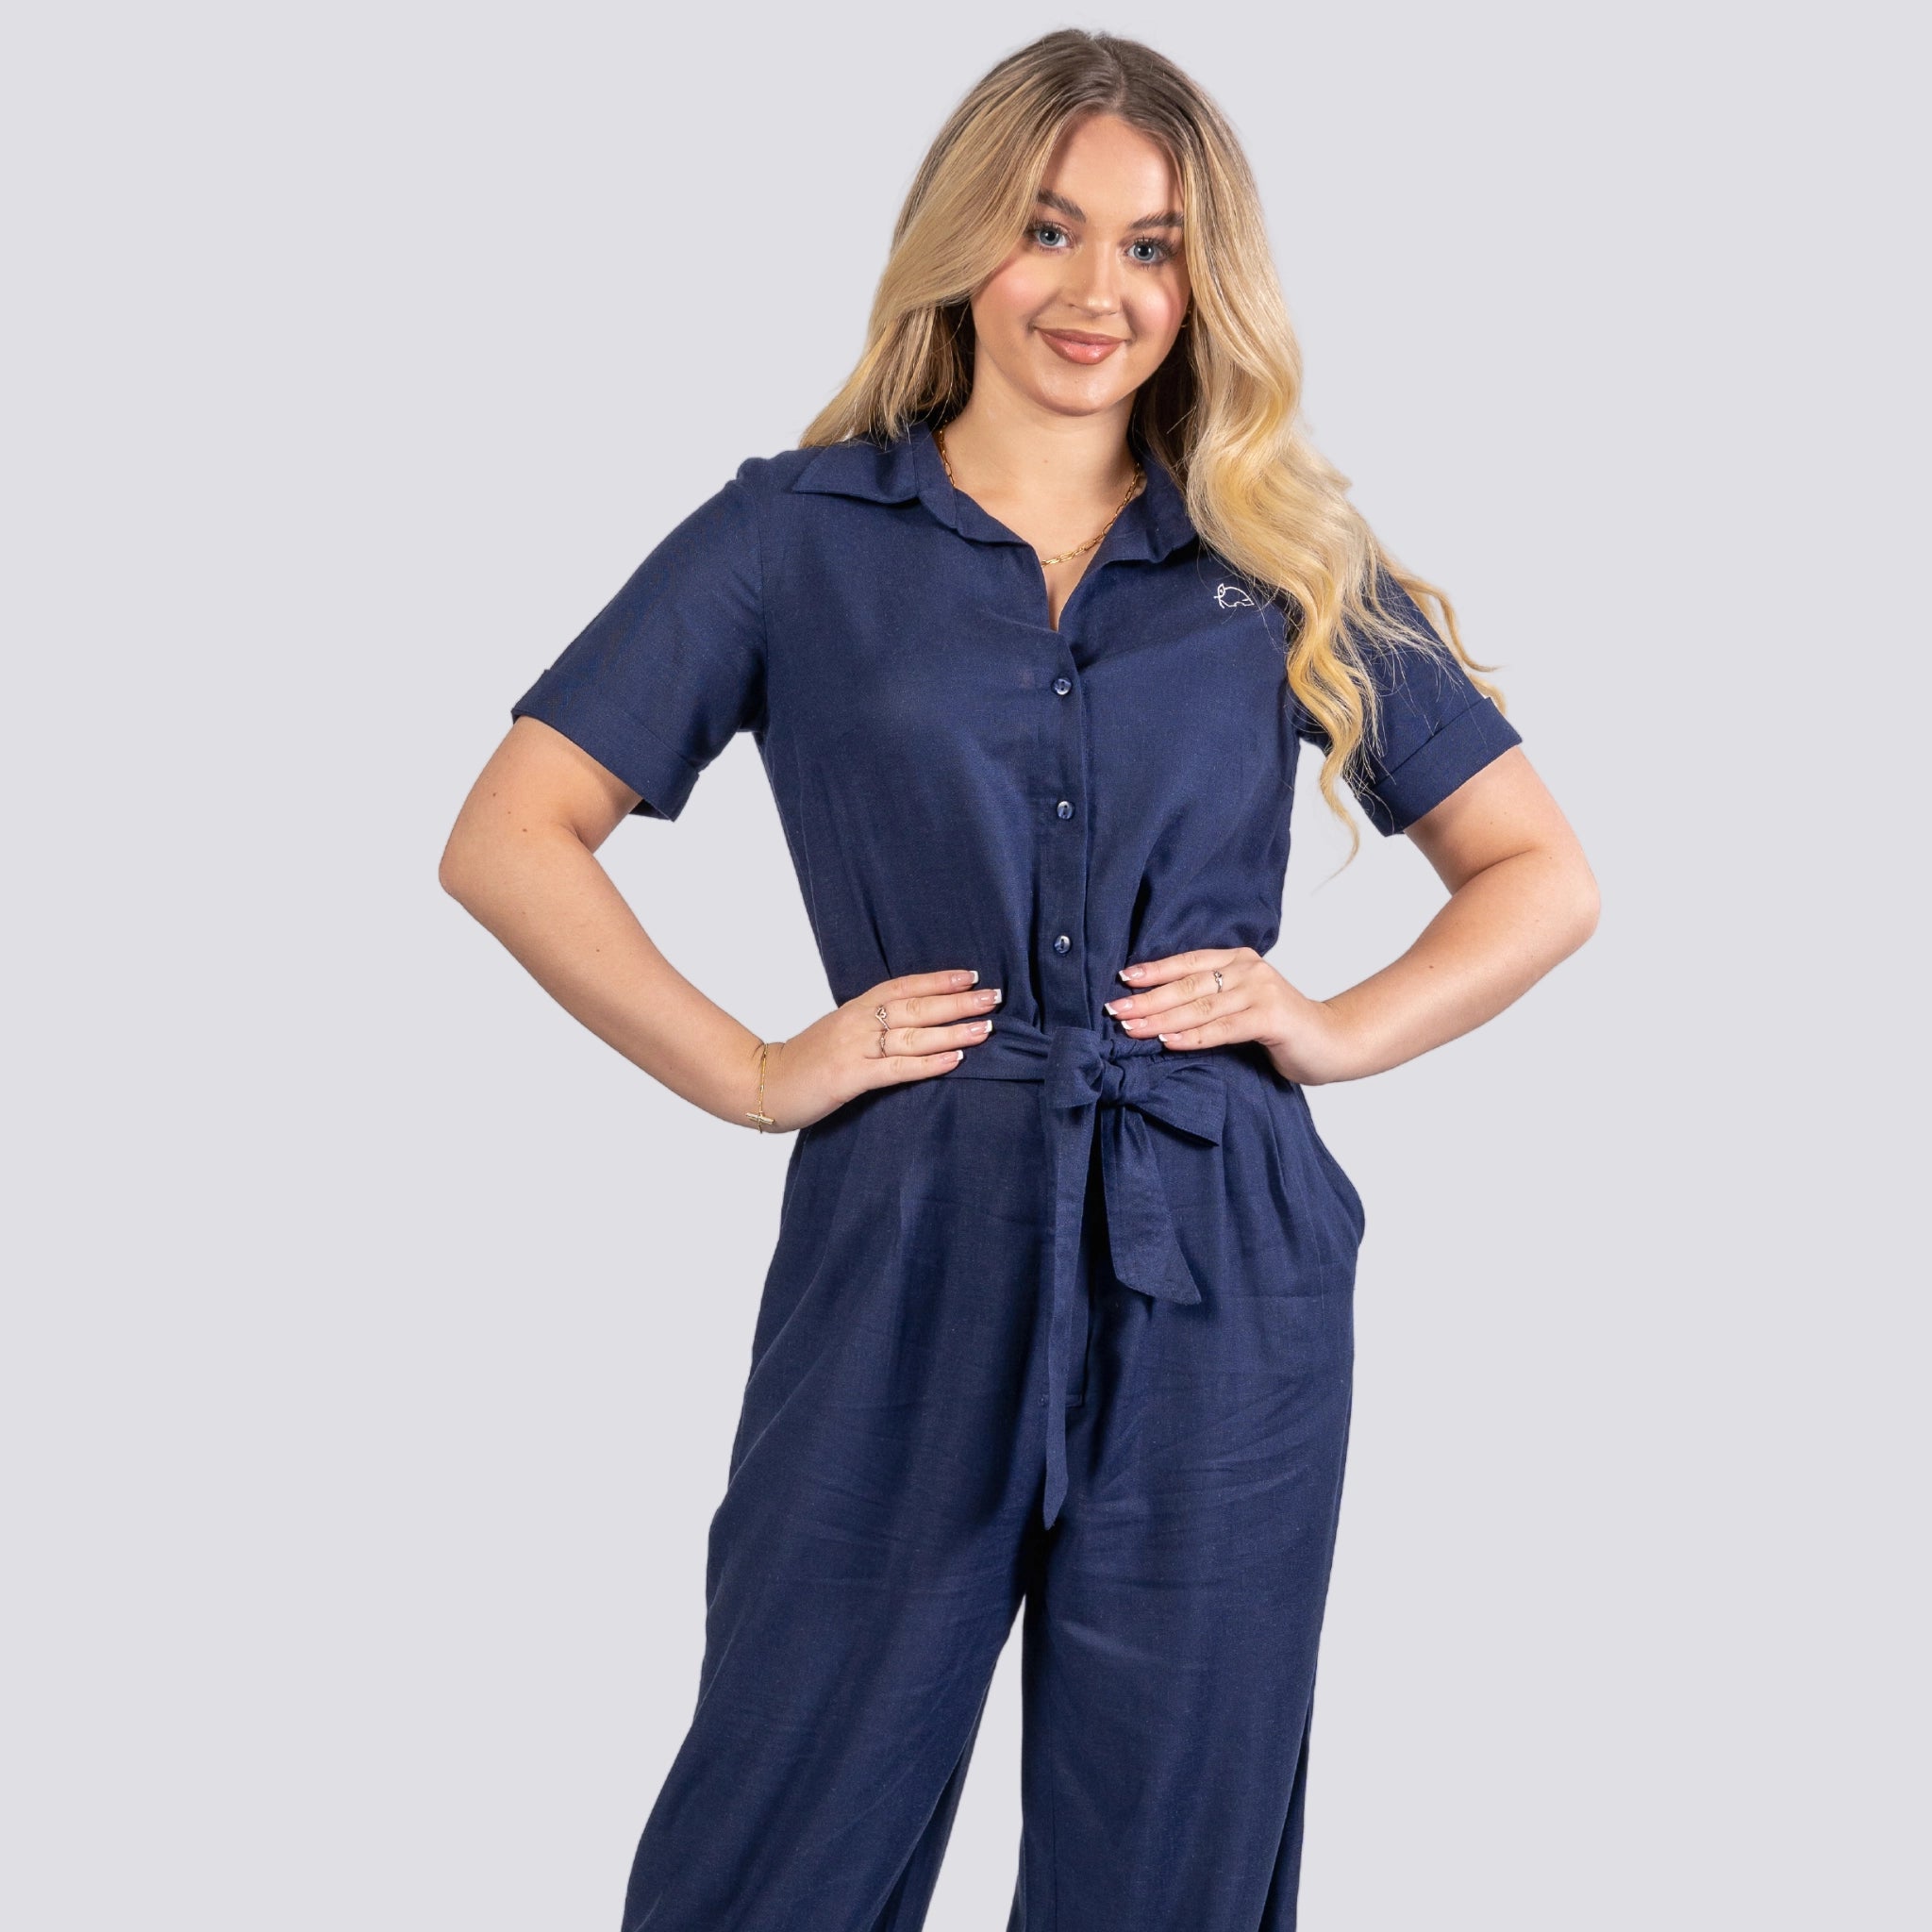 Woman in a Karee Midnight Blue Elegance Viscose Linen Jumpsuit with short sleeves and a tied waist, standing with hands on hips, smiling at the camera against a light gray background.